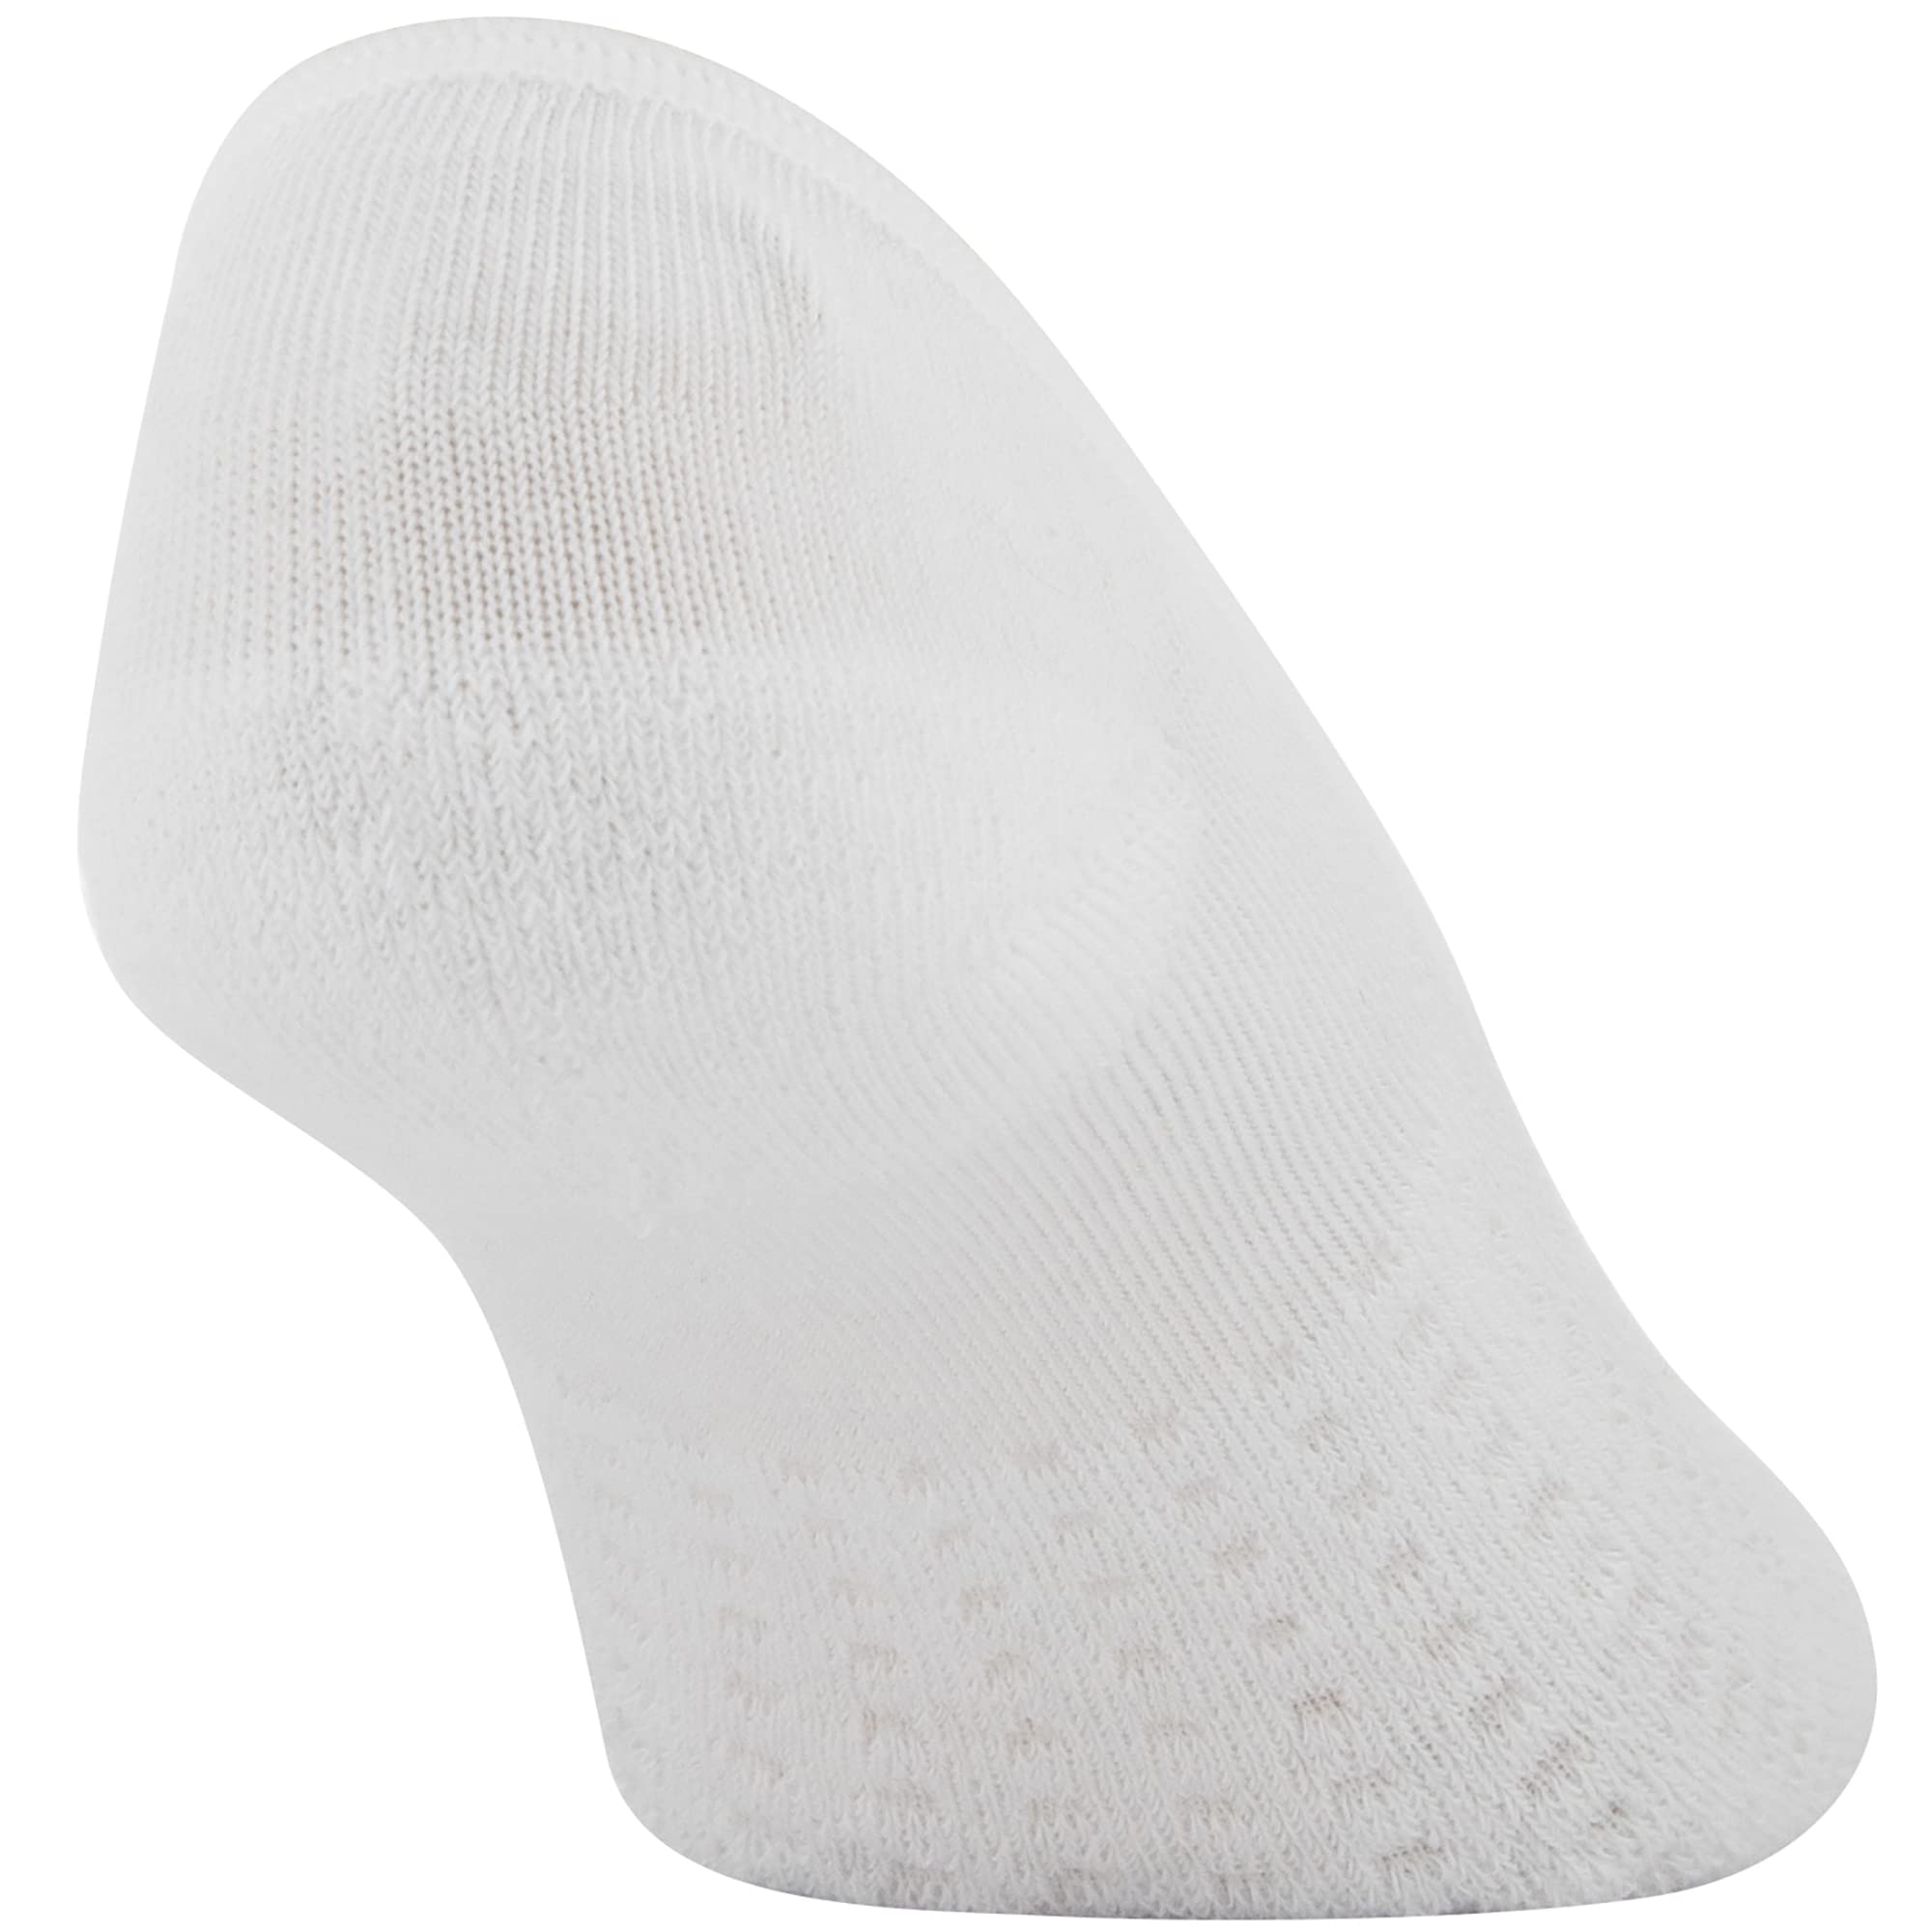 Peds Women's Zoned Cushion Mid Cut No Show Socks, Multipairs